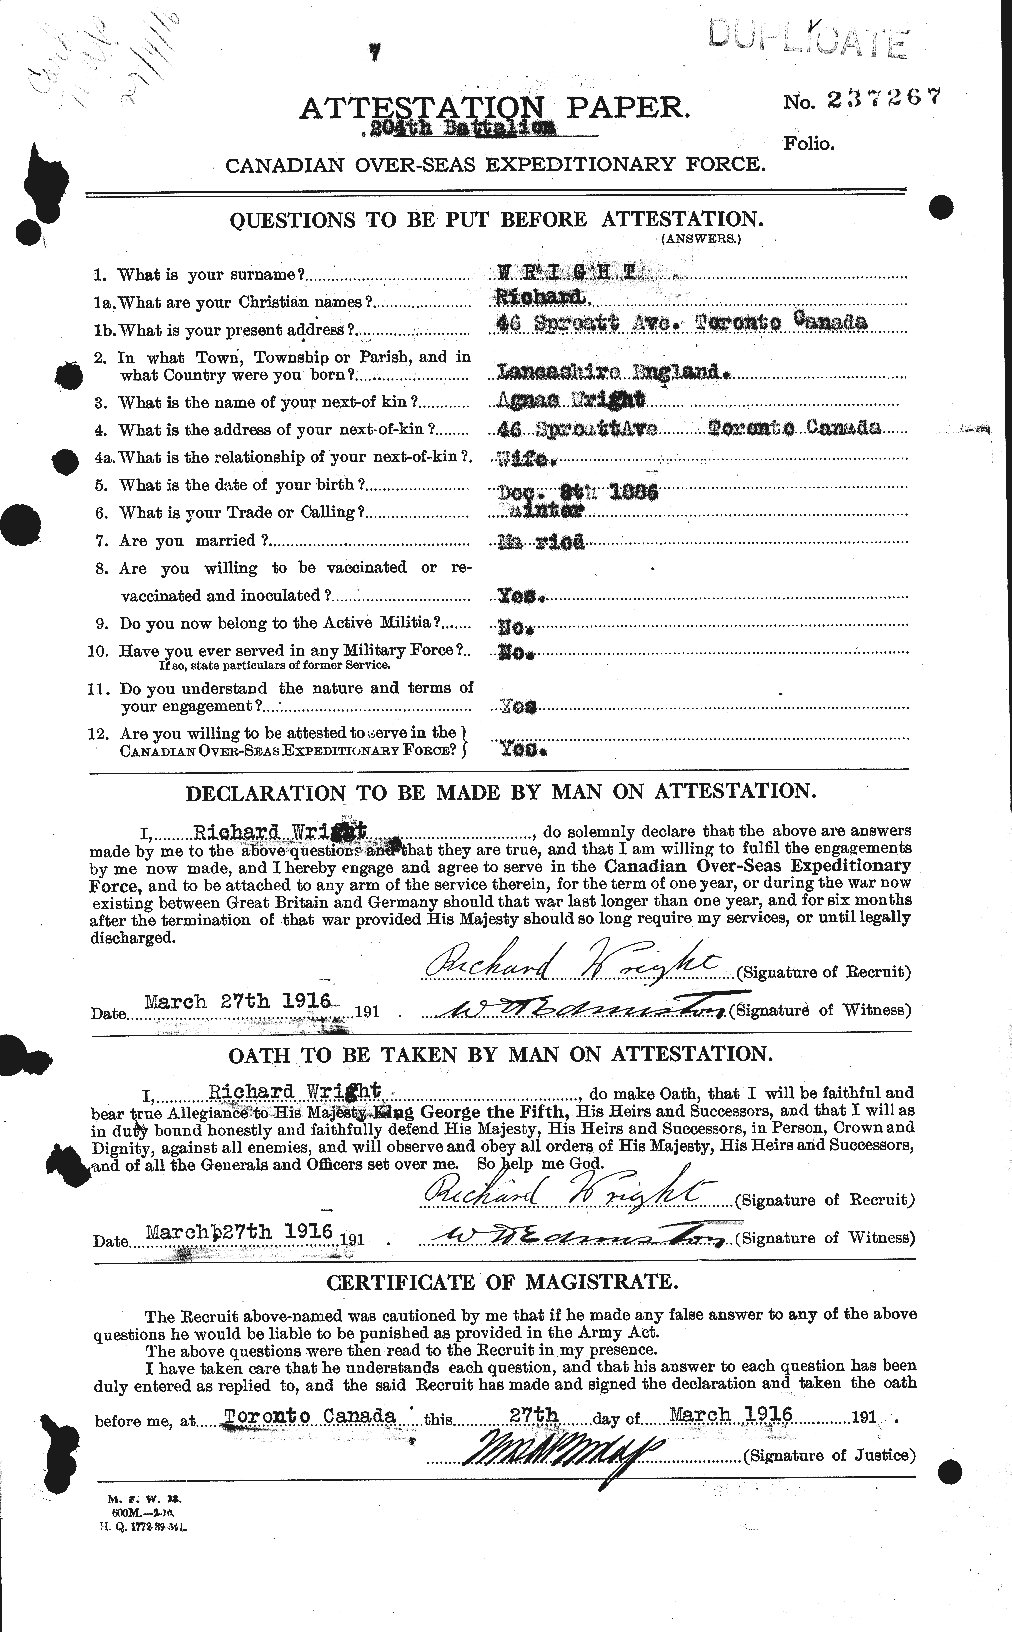 Personnel Records of the First World War - CEF 688483a